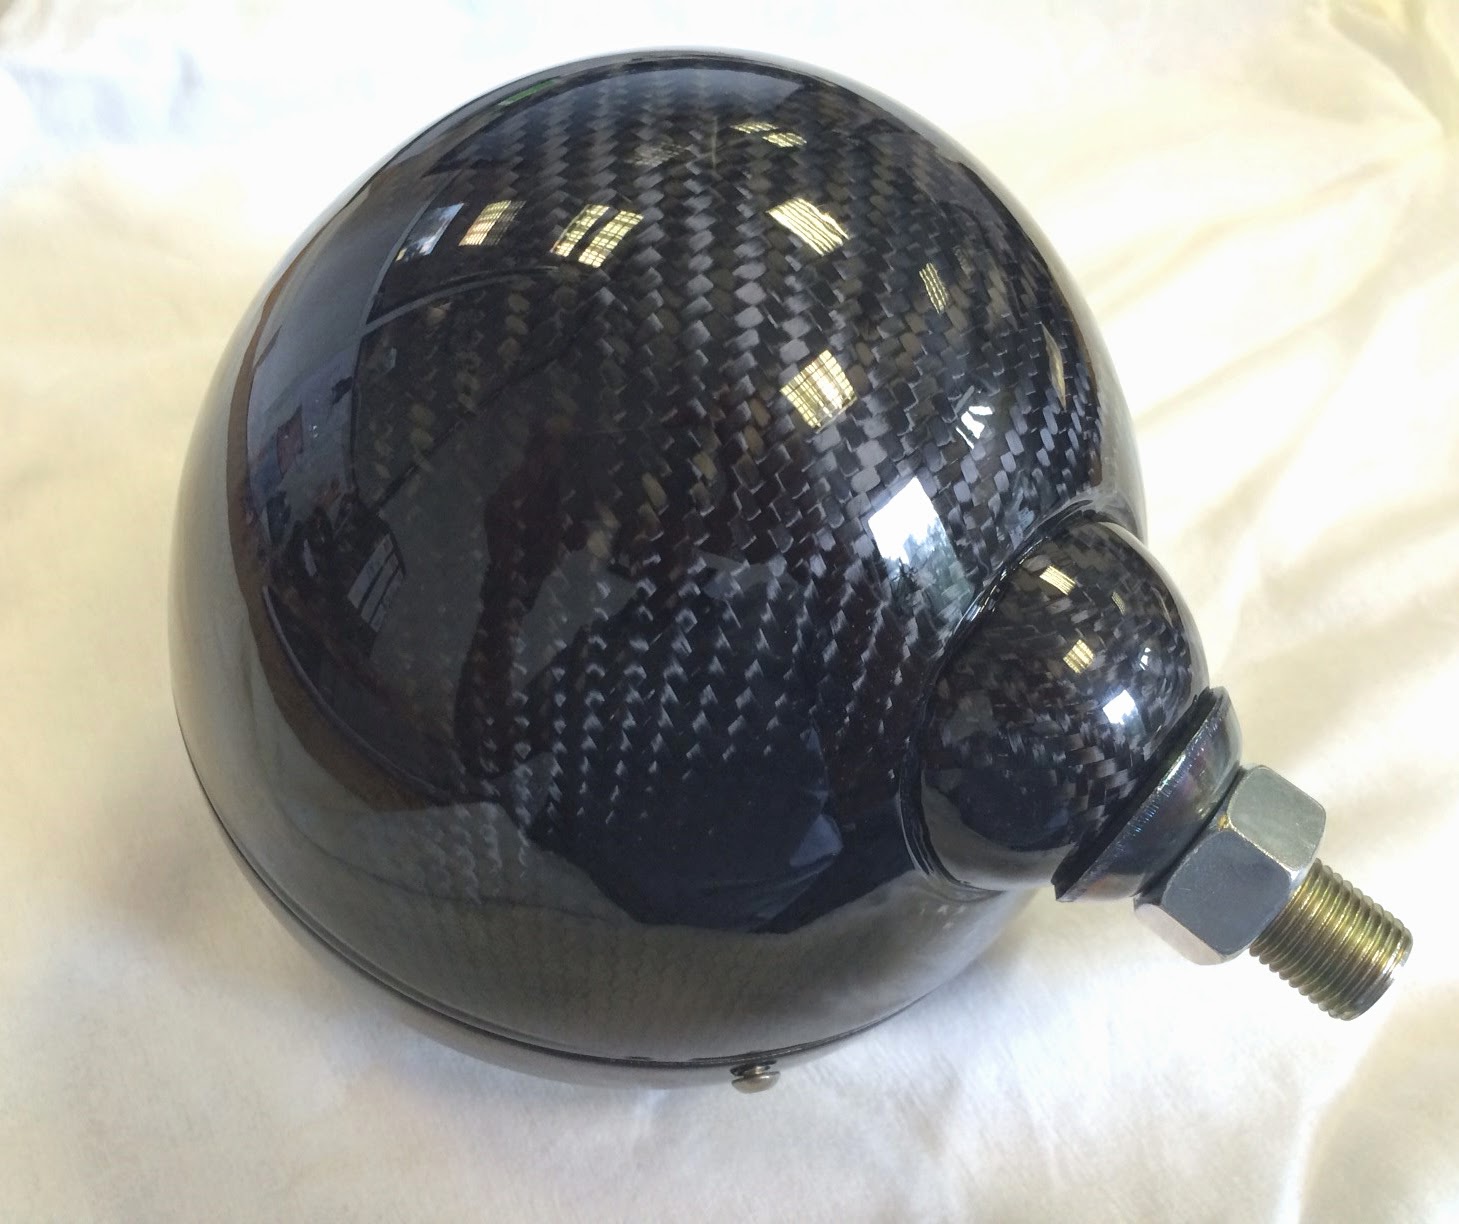 Caterham carbon fibre headlight bowls, freshly lacquered and looking amazing.